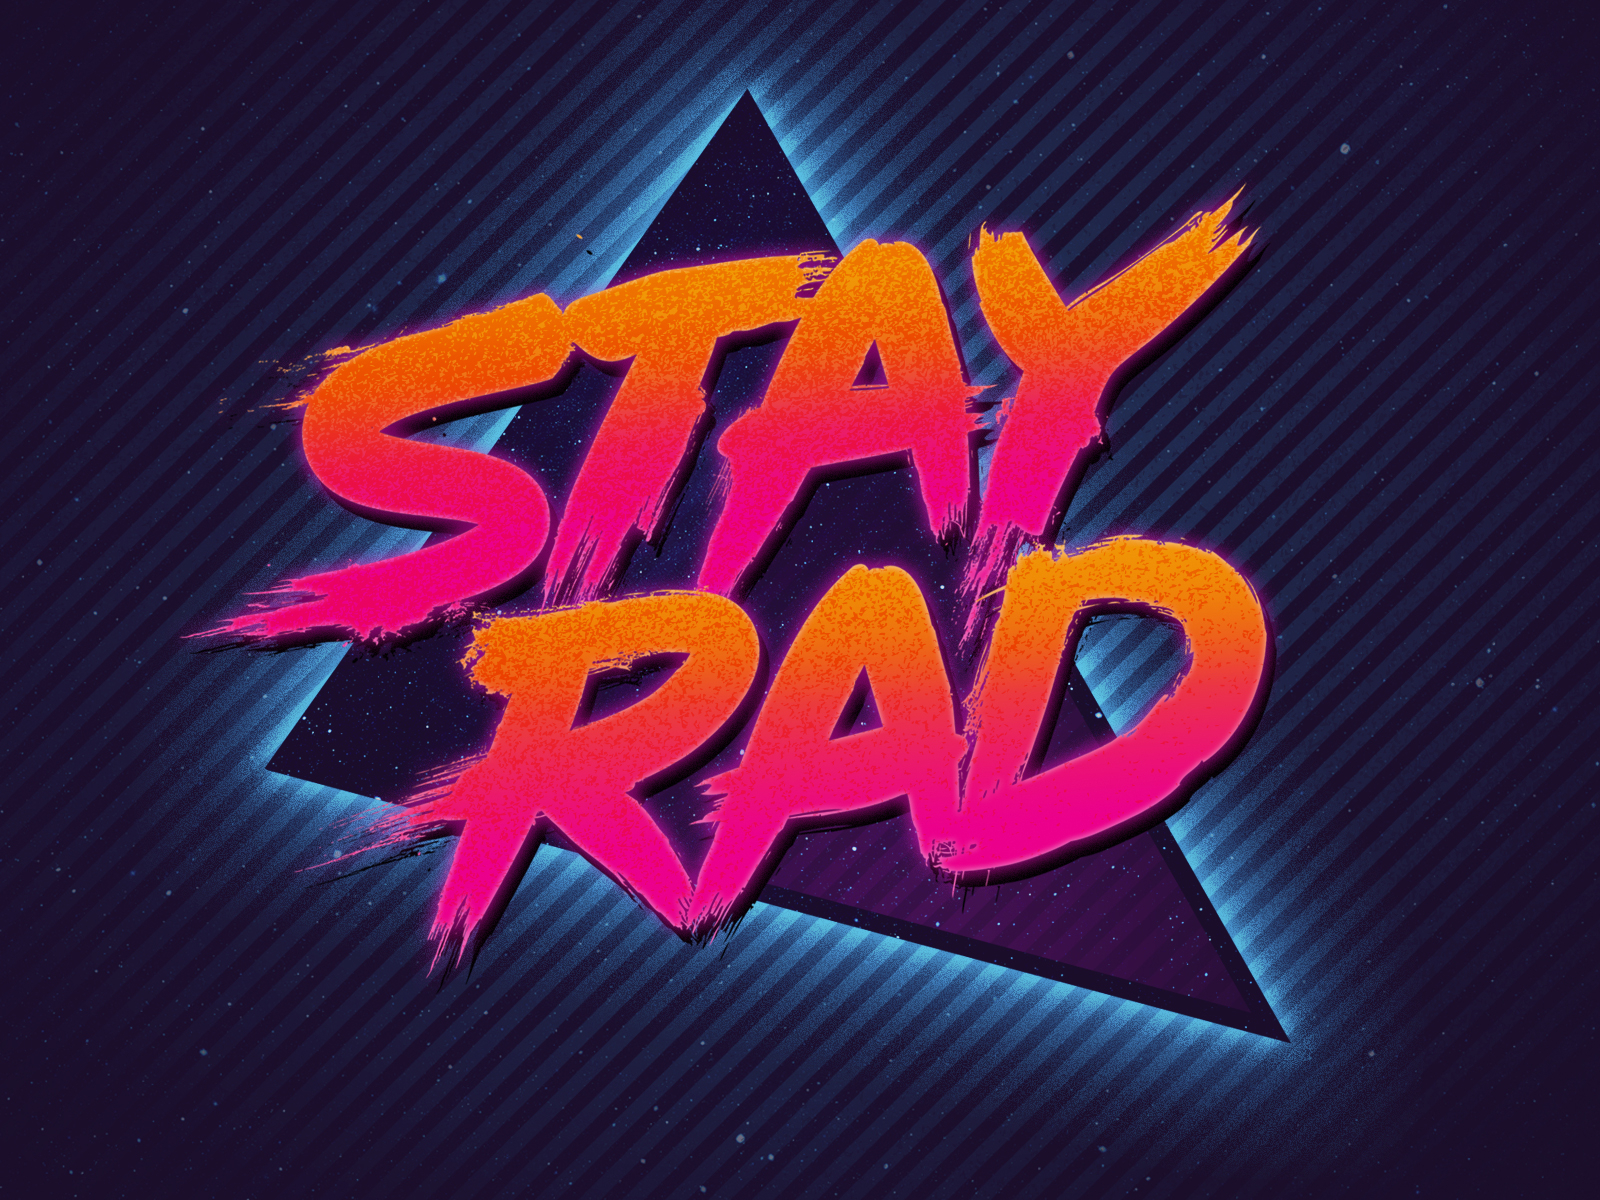 Stay Rad! by James White on Dribbble